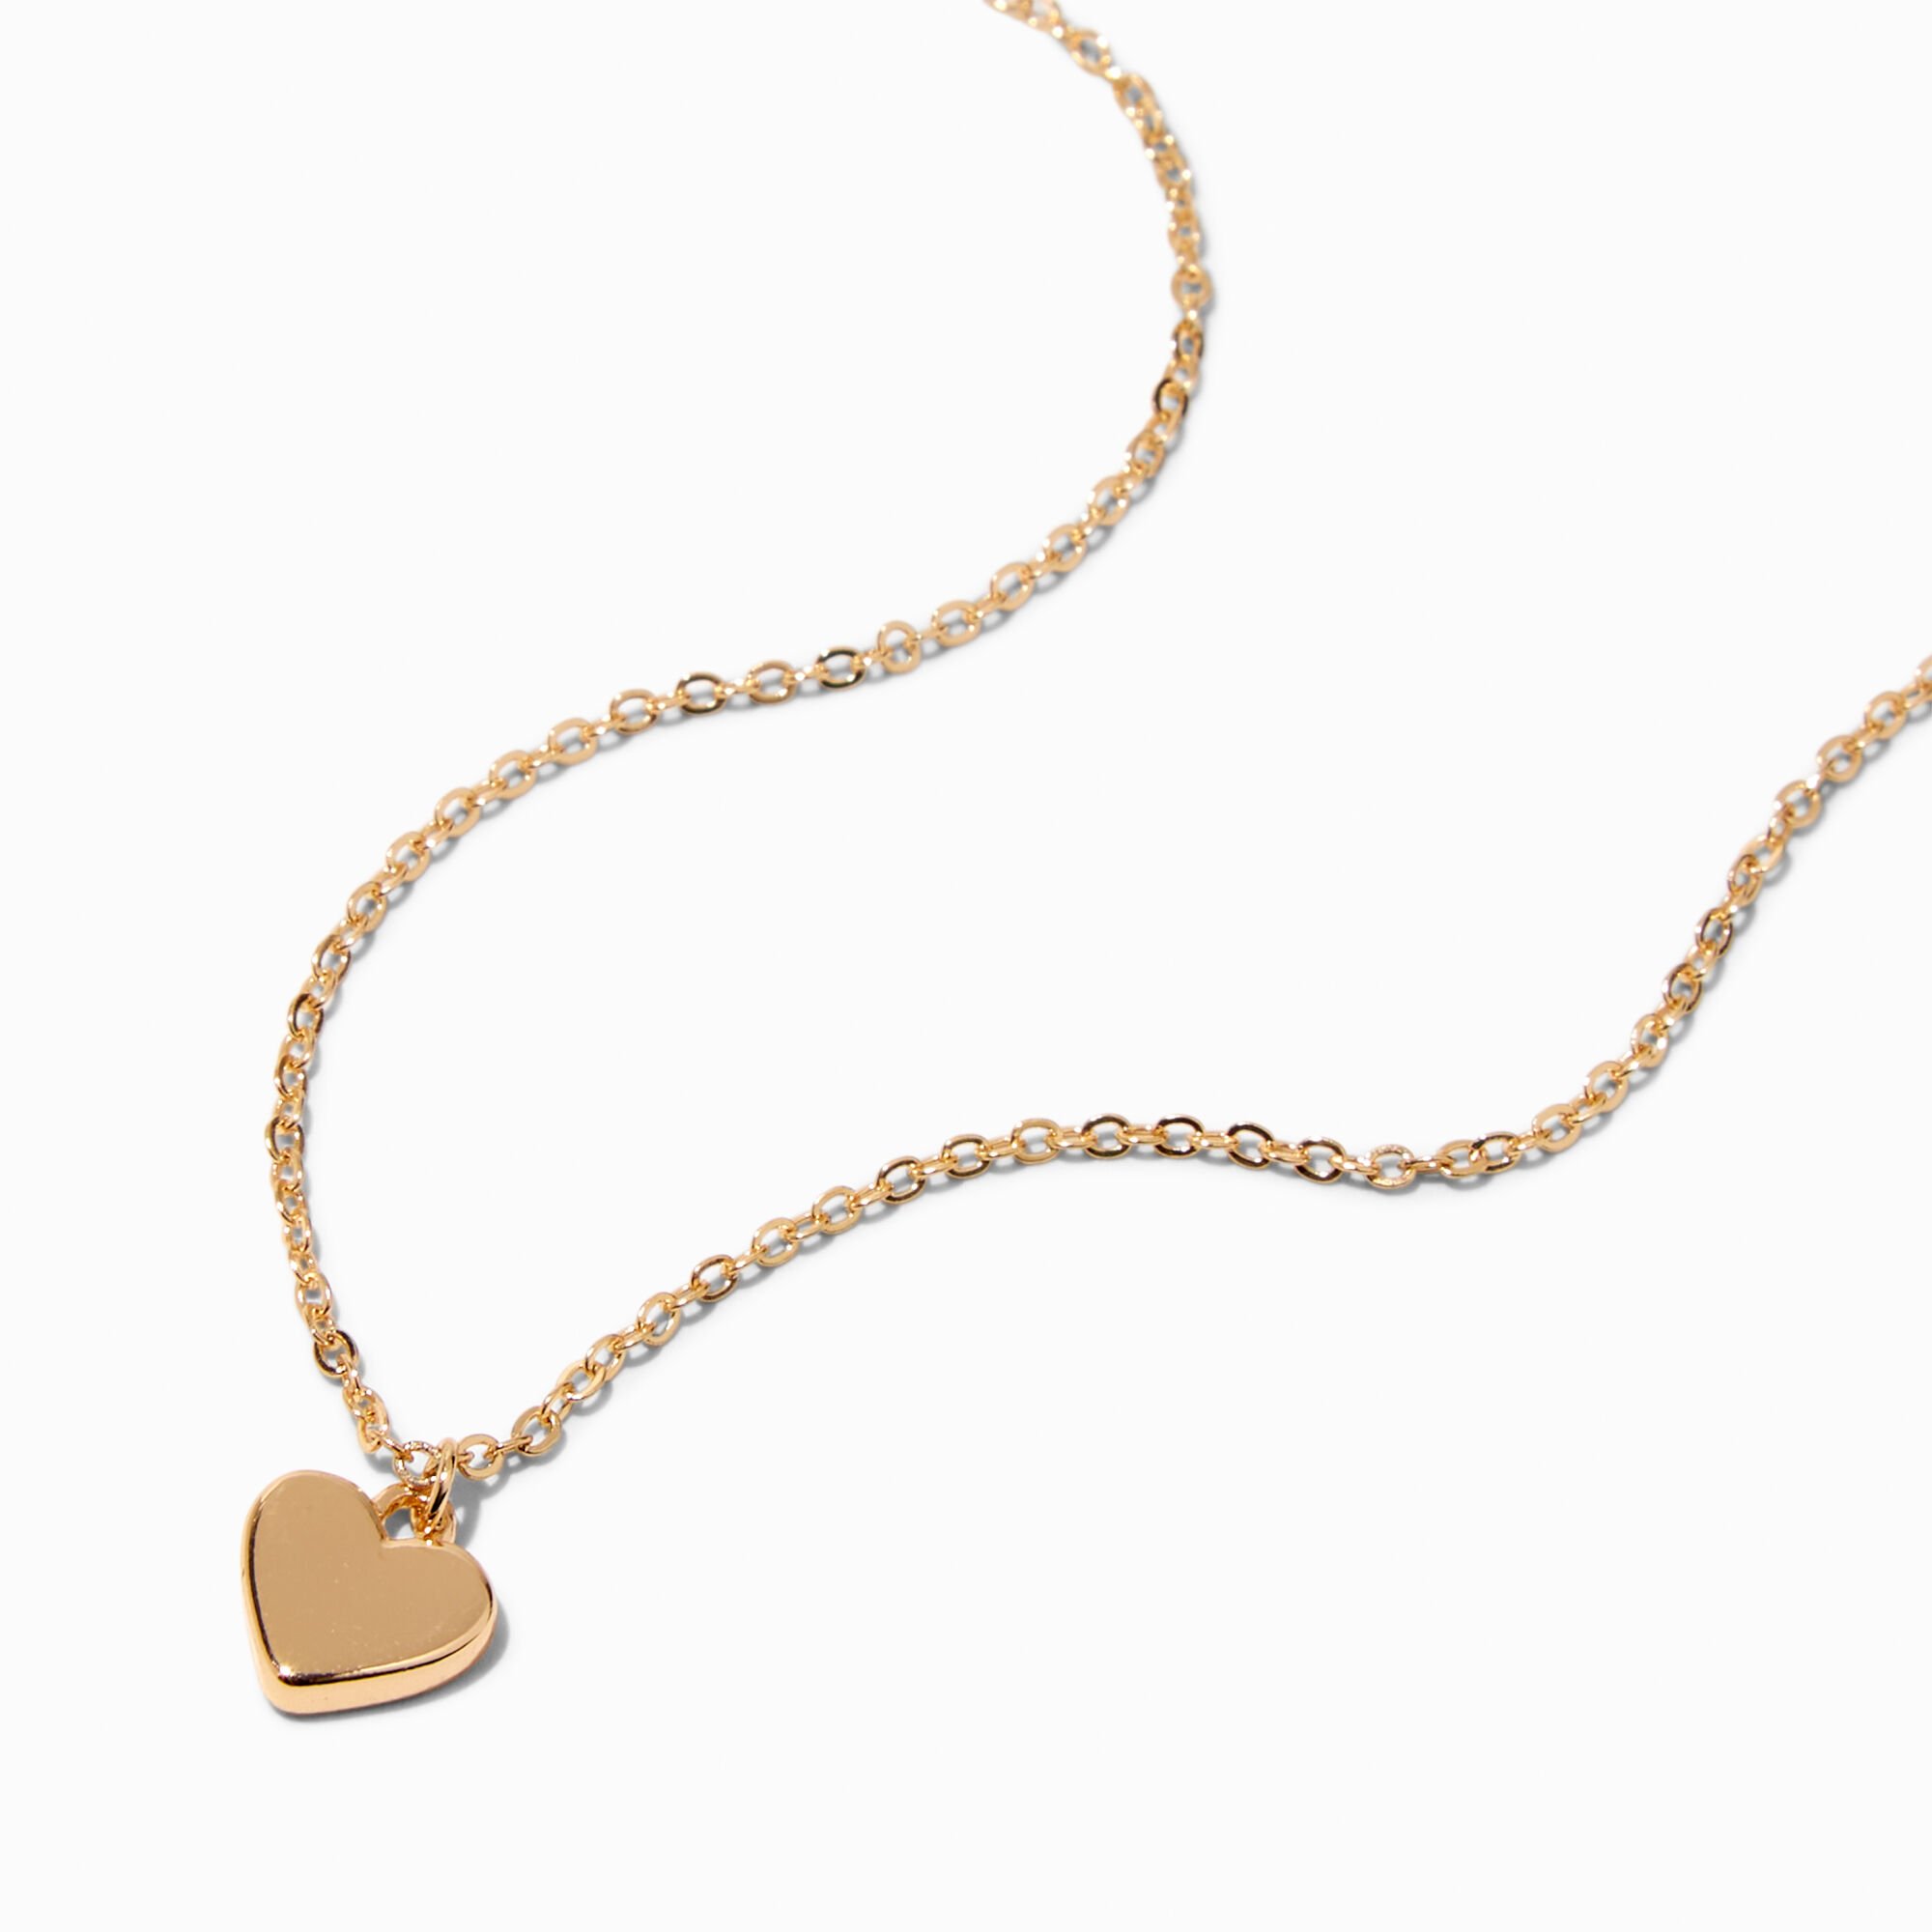 View Claires Tone Heart Pendant Necklace Gold information